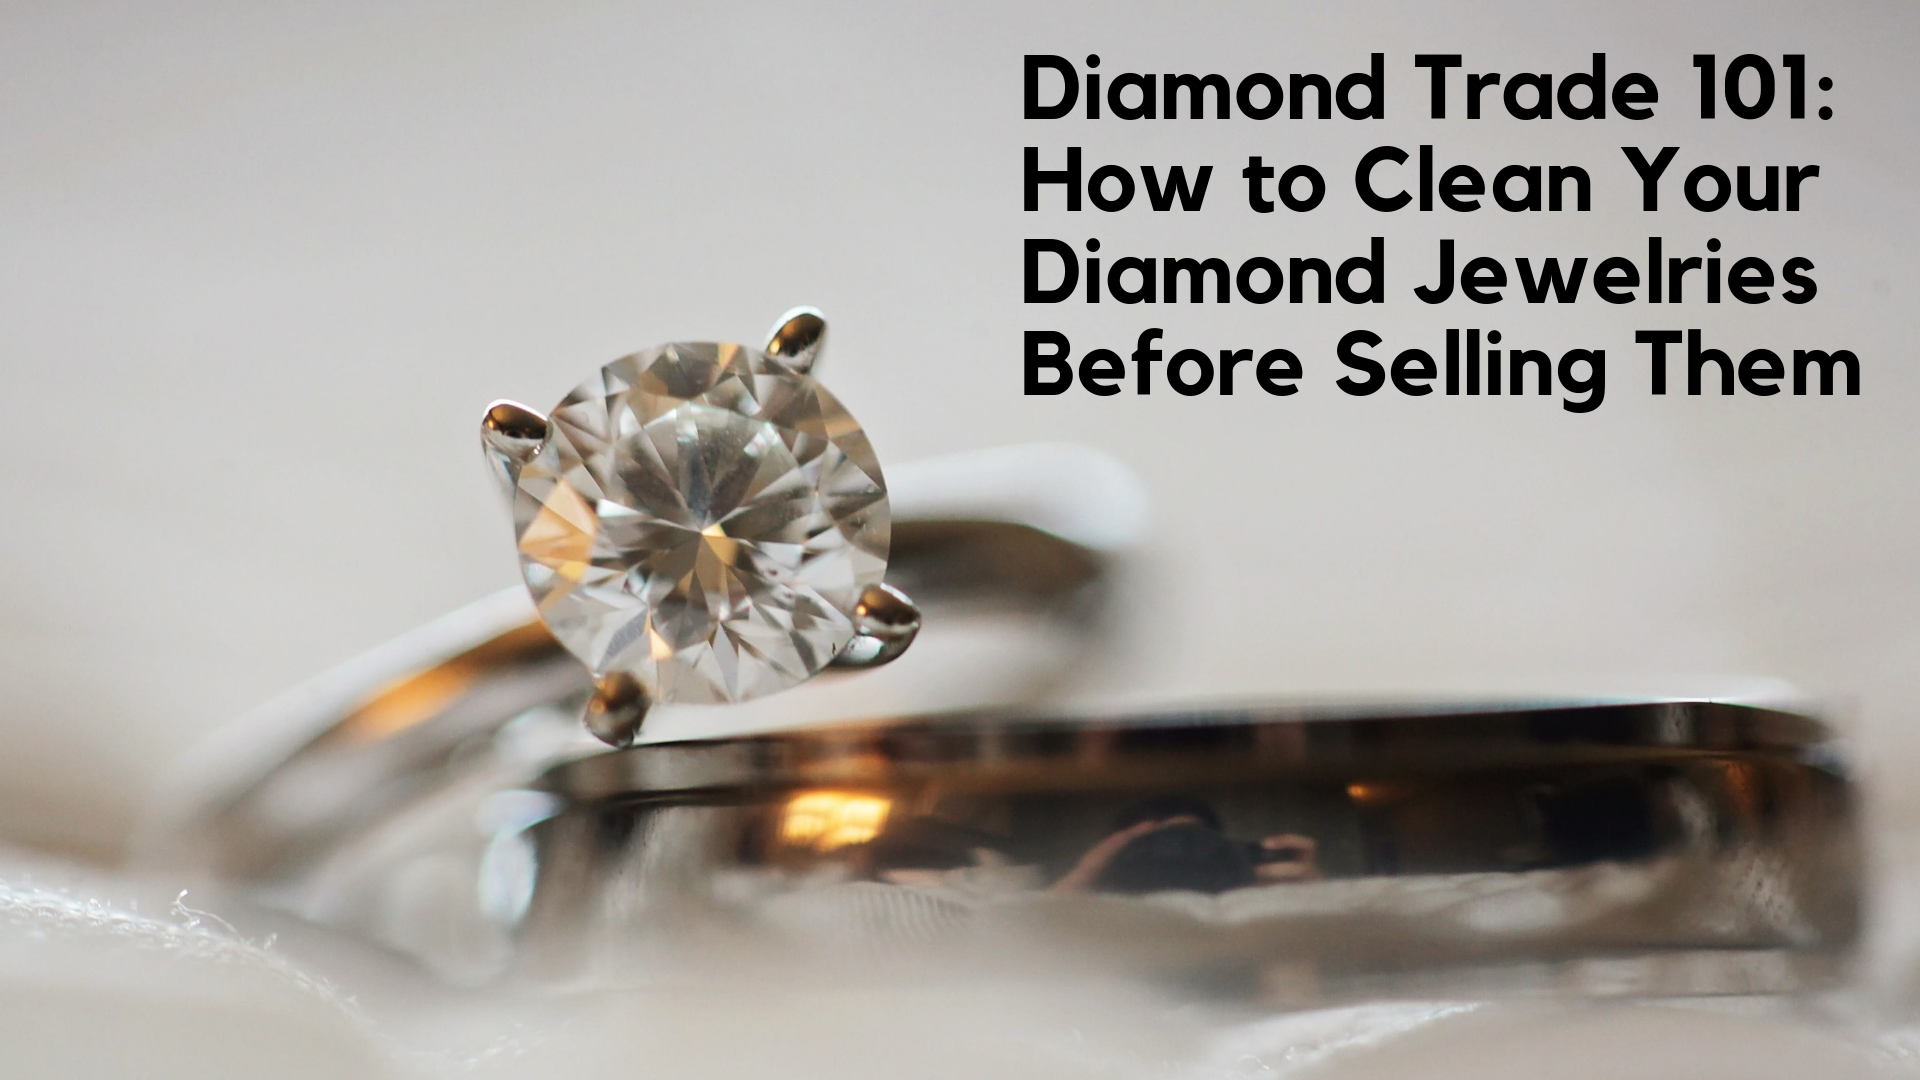 Selling Your Diamond Jewelry